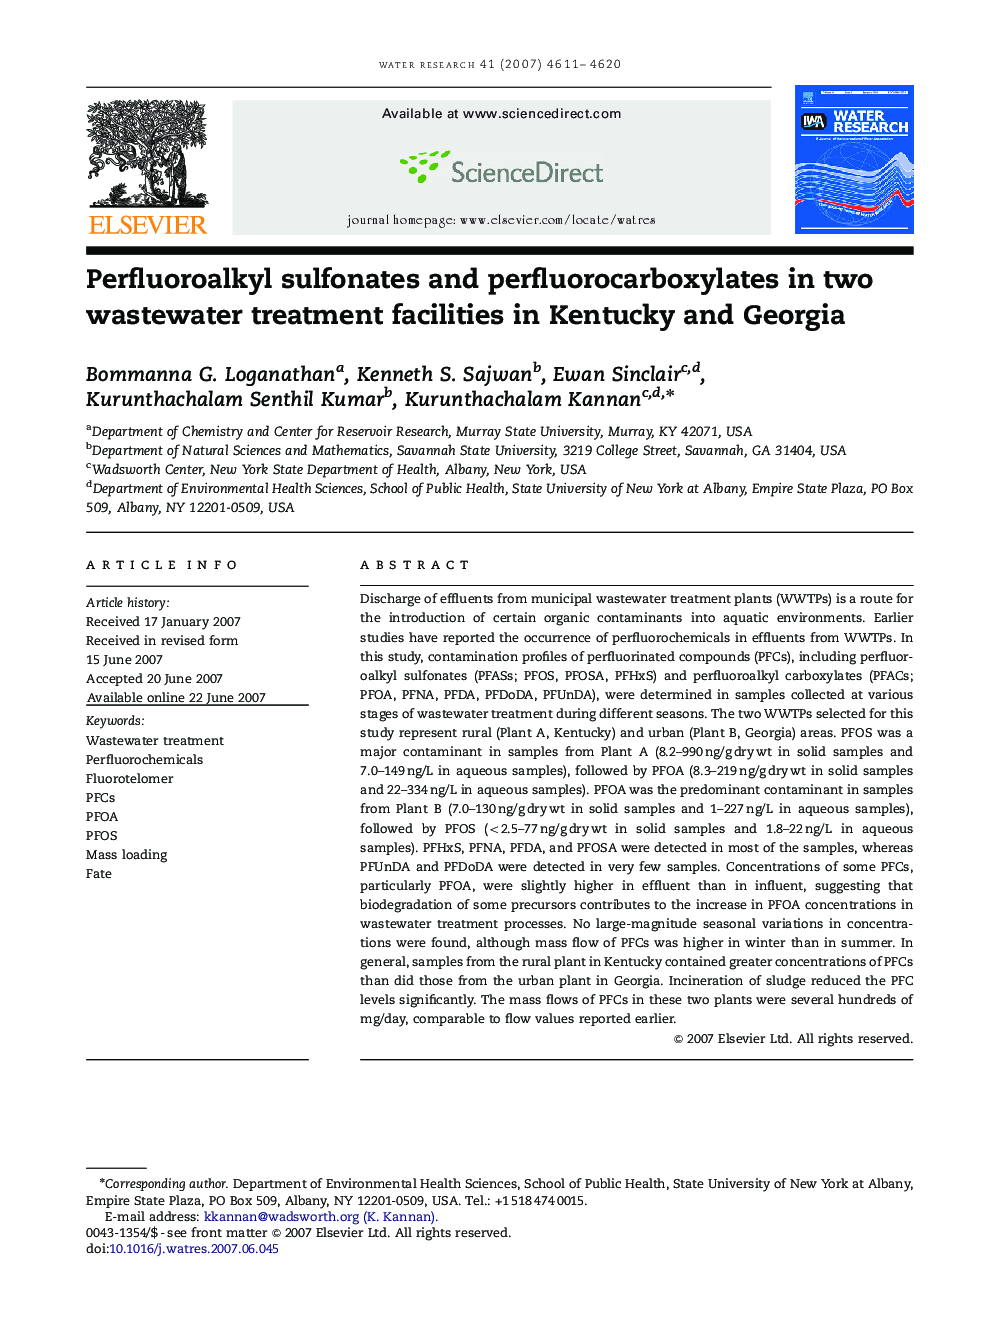 Perfluoroalkyl sulfonates and perfluorocarboxylates in two wastewater treatment facilities in Kentucky and Georgia